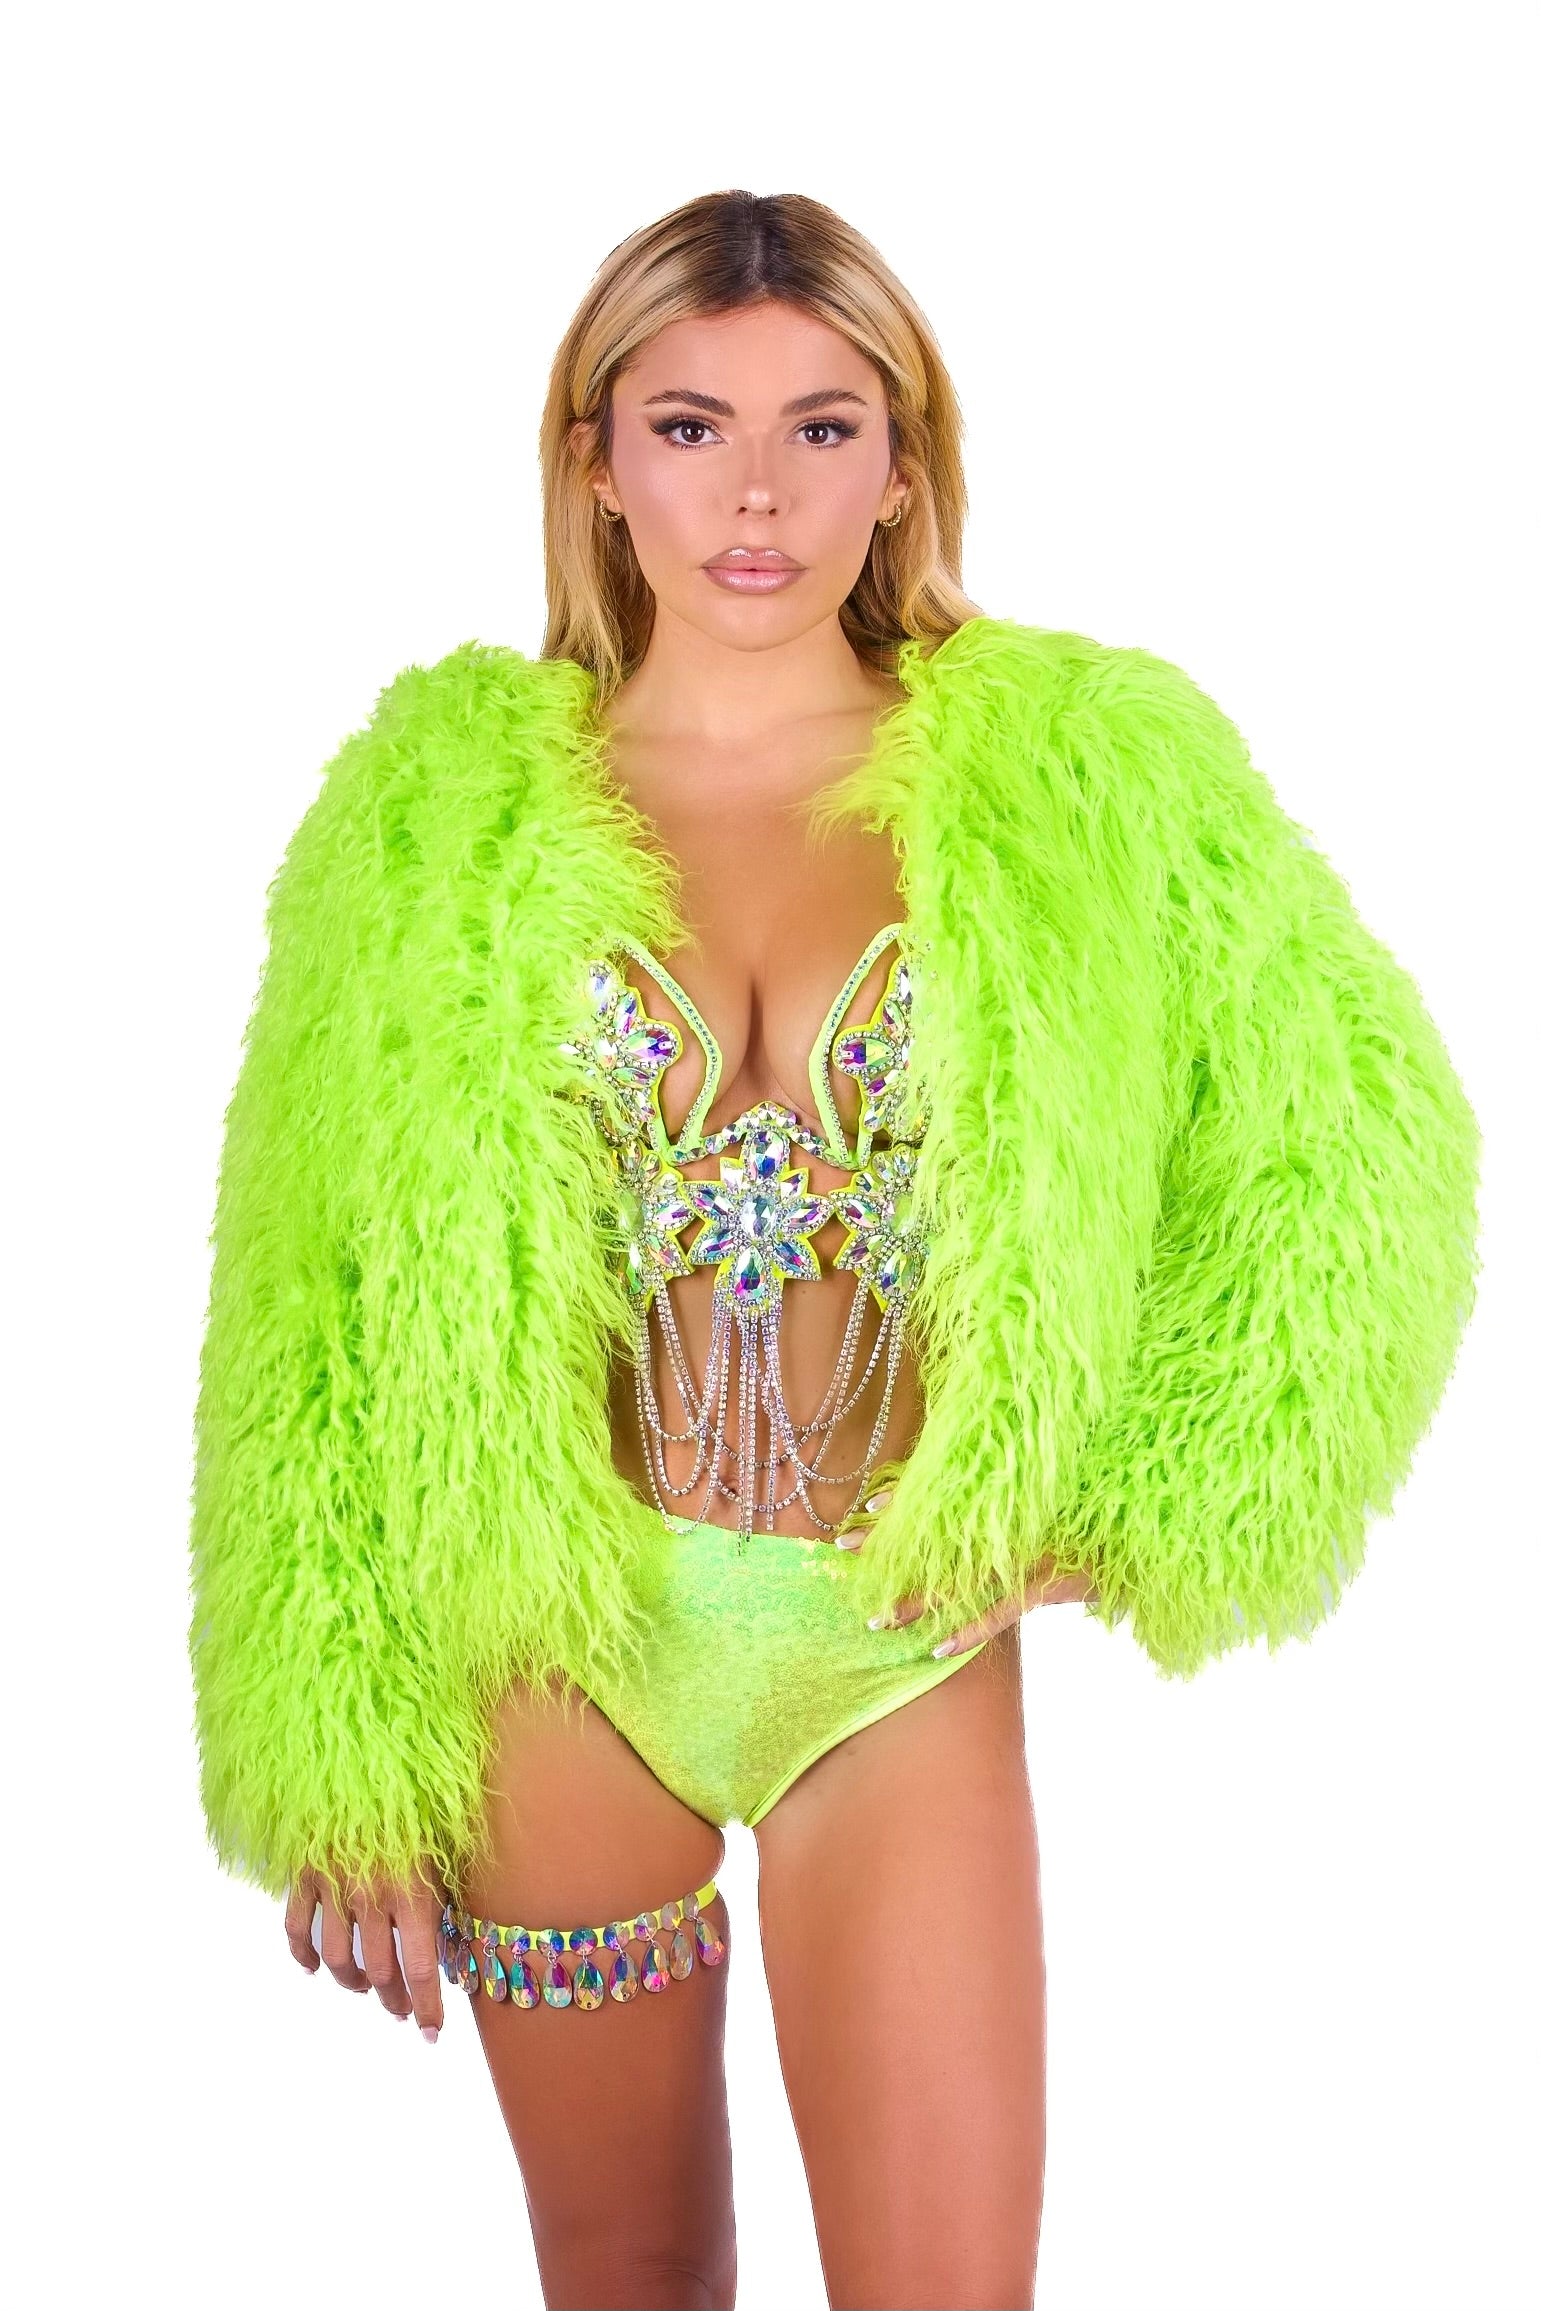 FULL OUTFIT- Fuzzy Neon Lotus (4 pcs)